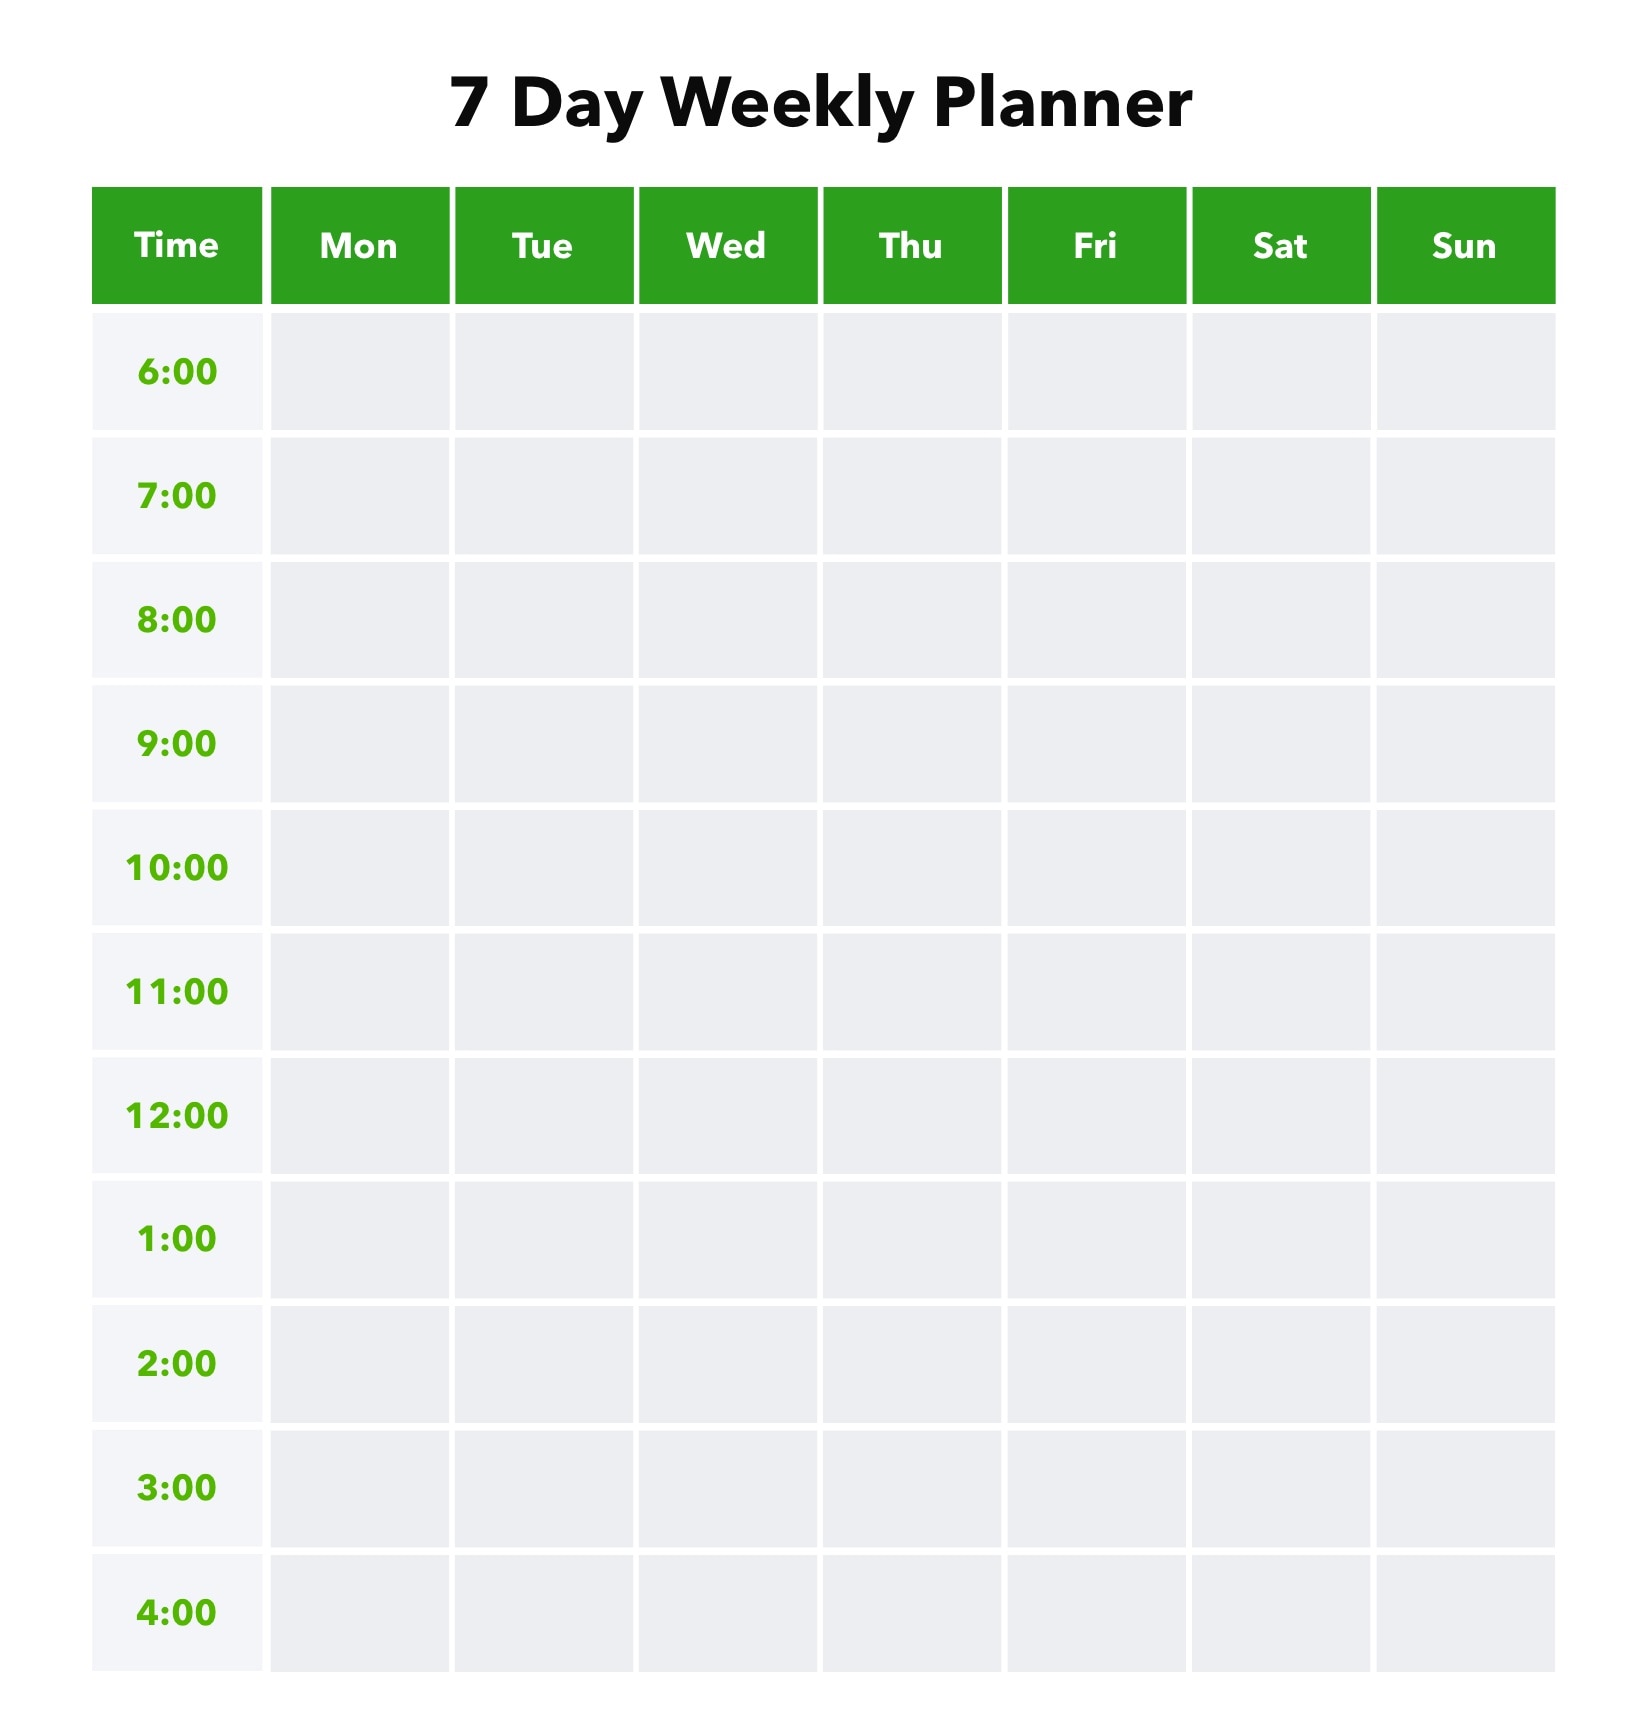 7 day weekly planner